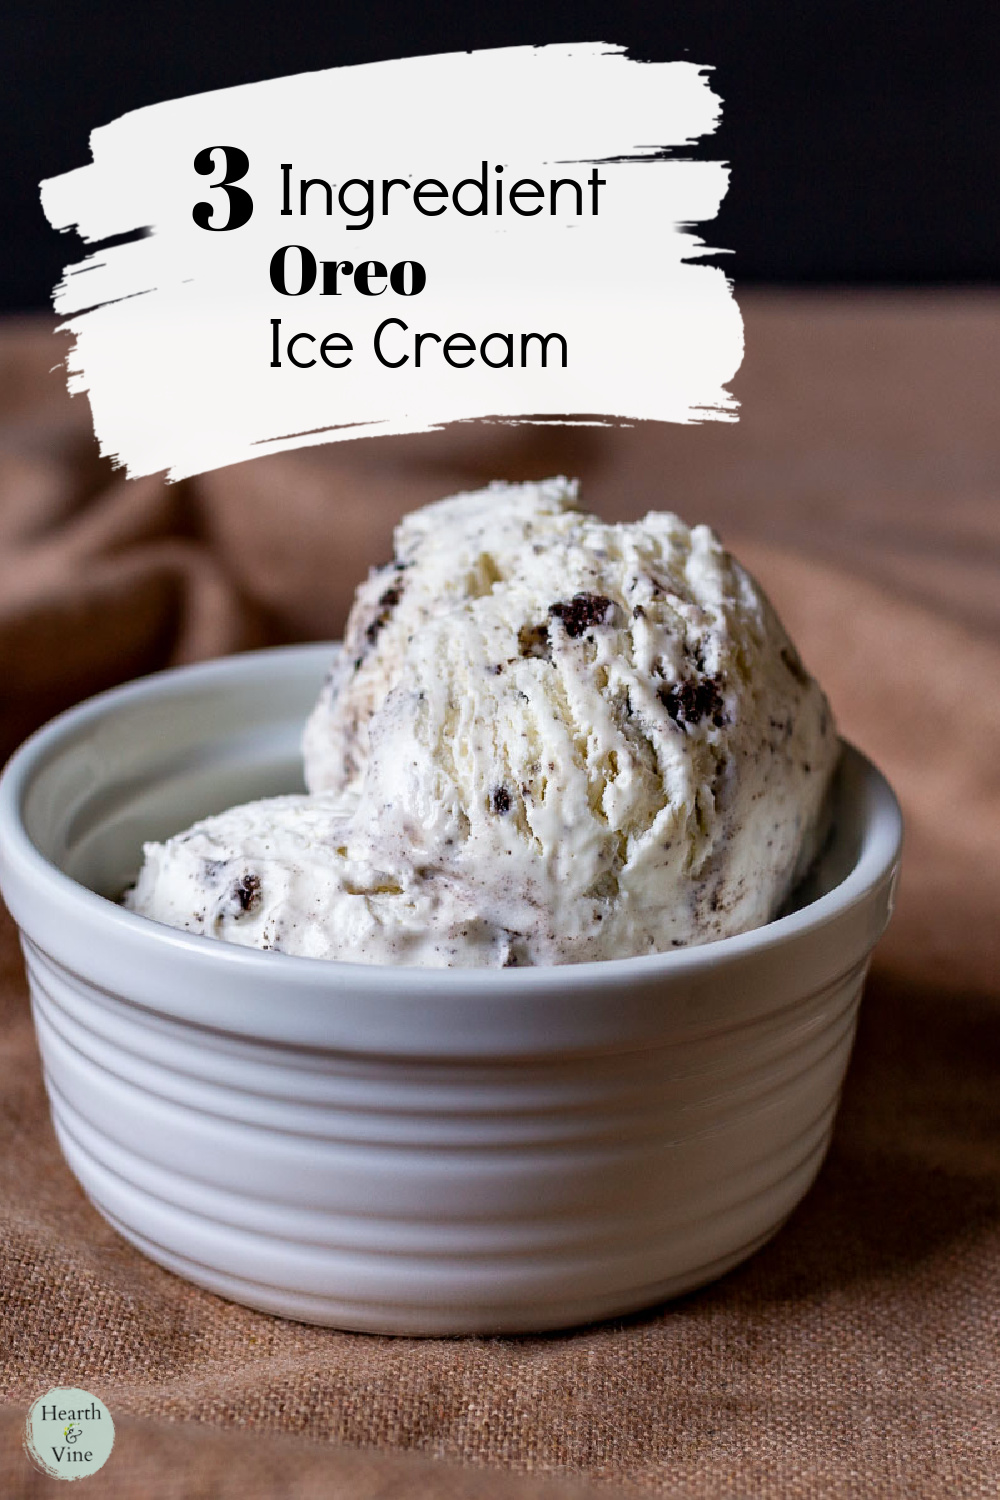 Two scoops of Oreo ice cream in a white bowl.